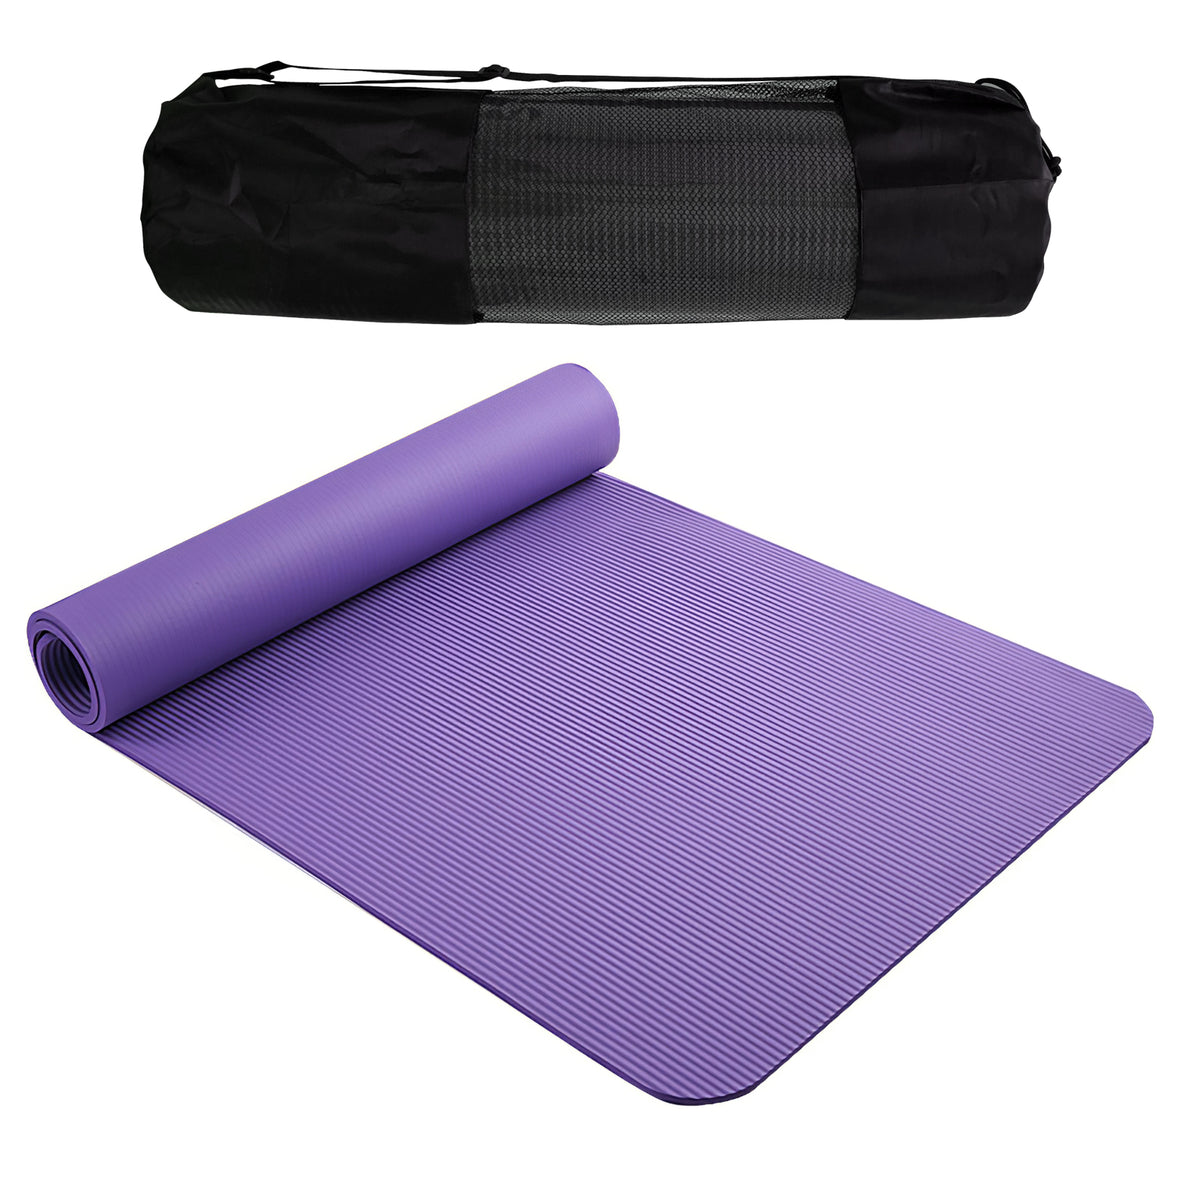 SK Depot 10mm Thick NBR Non-Slip Fitness Pad Exercise Yoga Mat